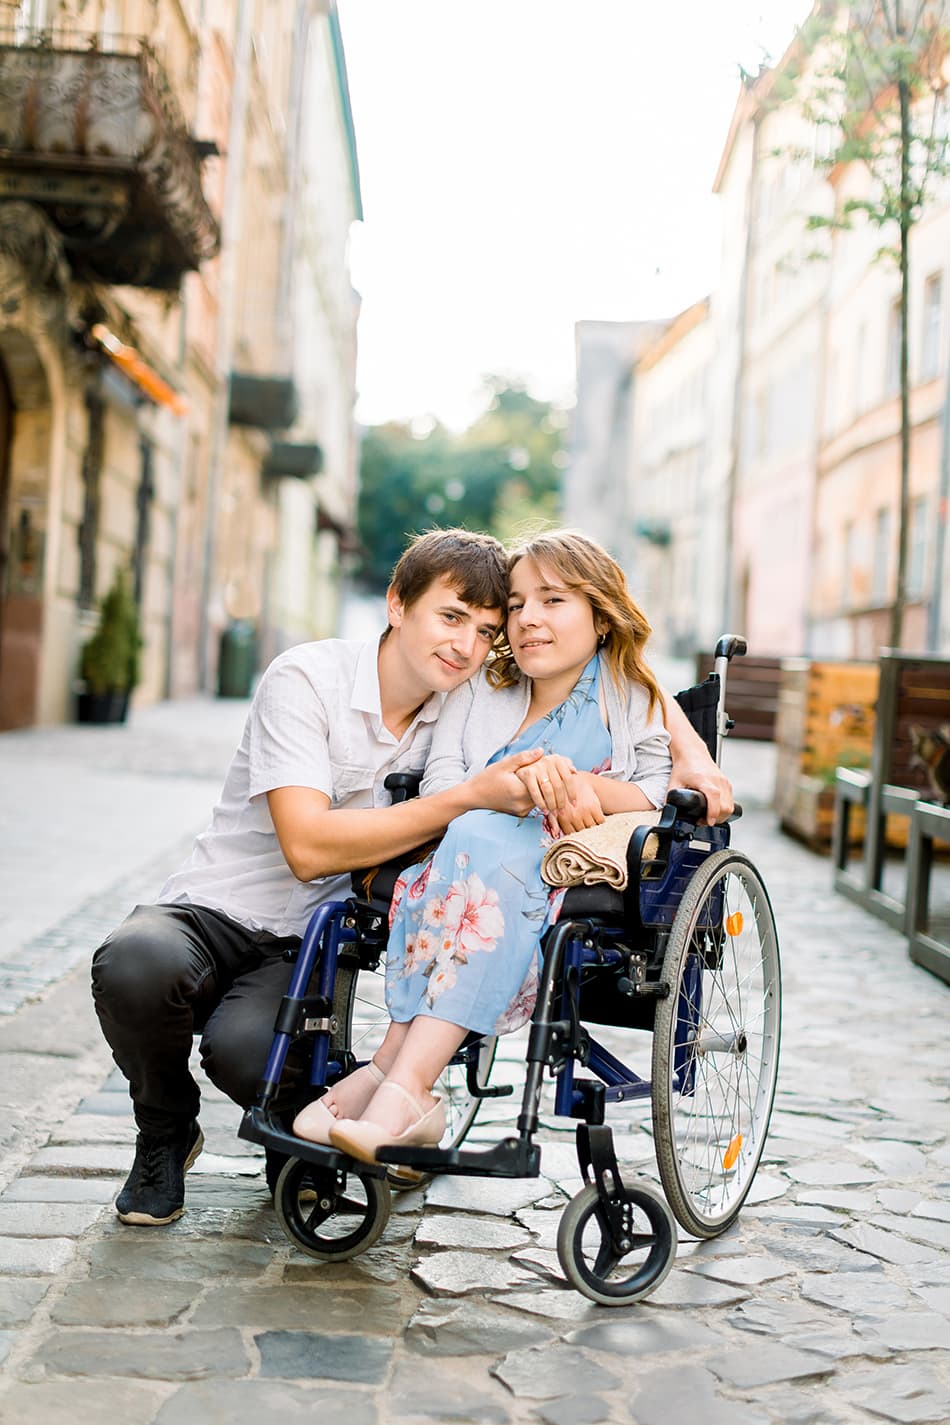 A couple who is disabled embracing each other pictures on a cobblestone street.